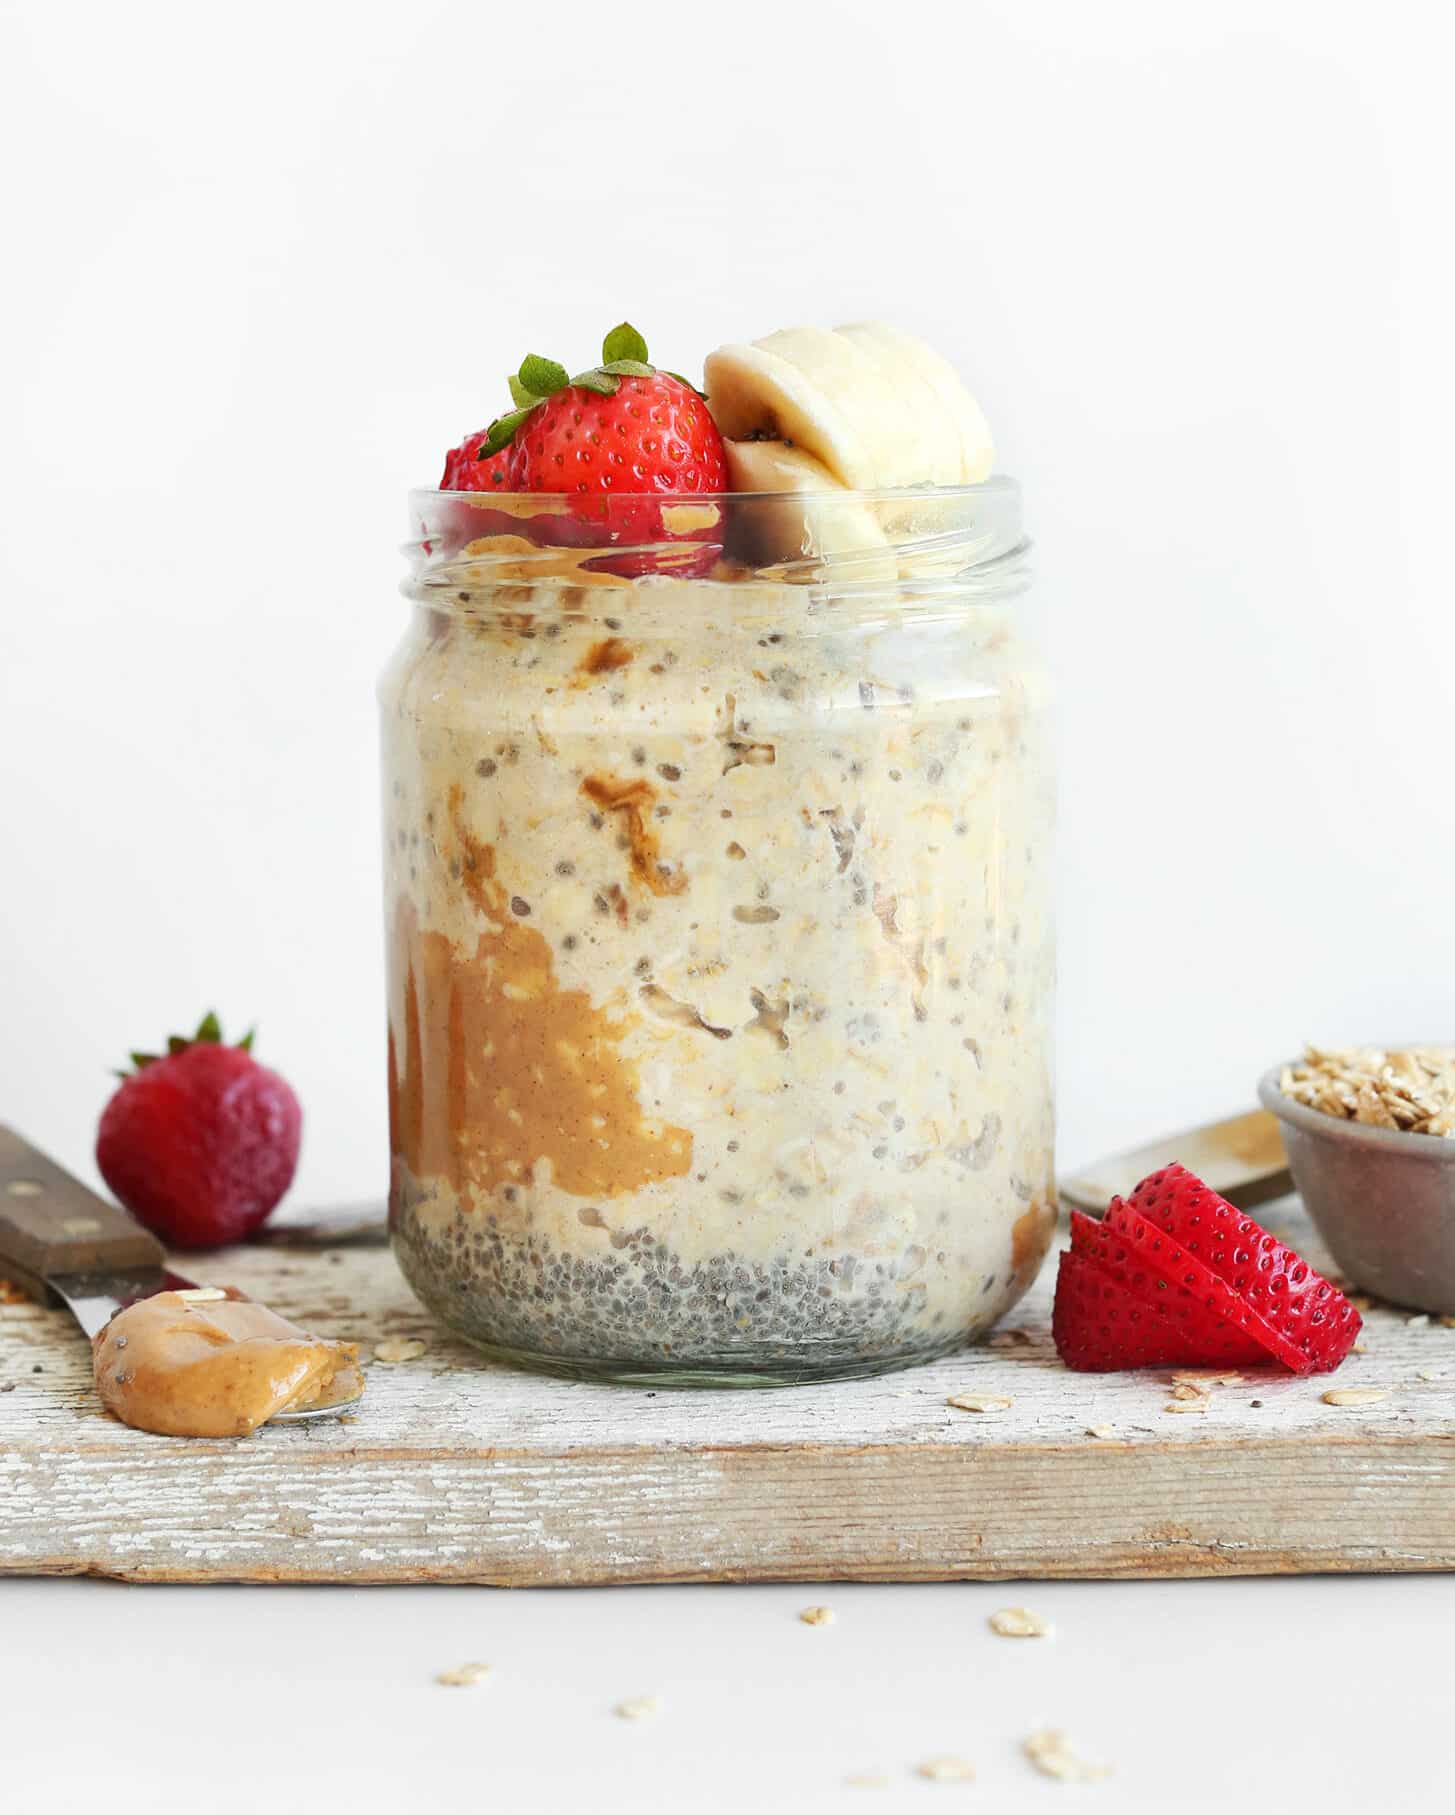 A jar filled with layers of overnight oats, topped with fresh strawberries and banana slices, sits on a rustic wooden table surrounded by scattered ingredients.